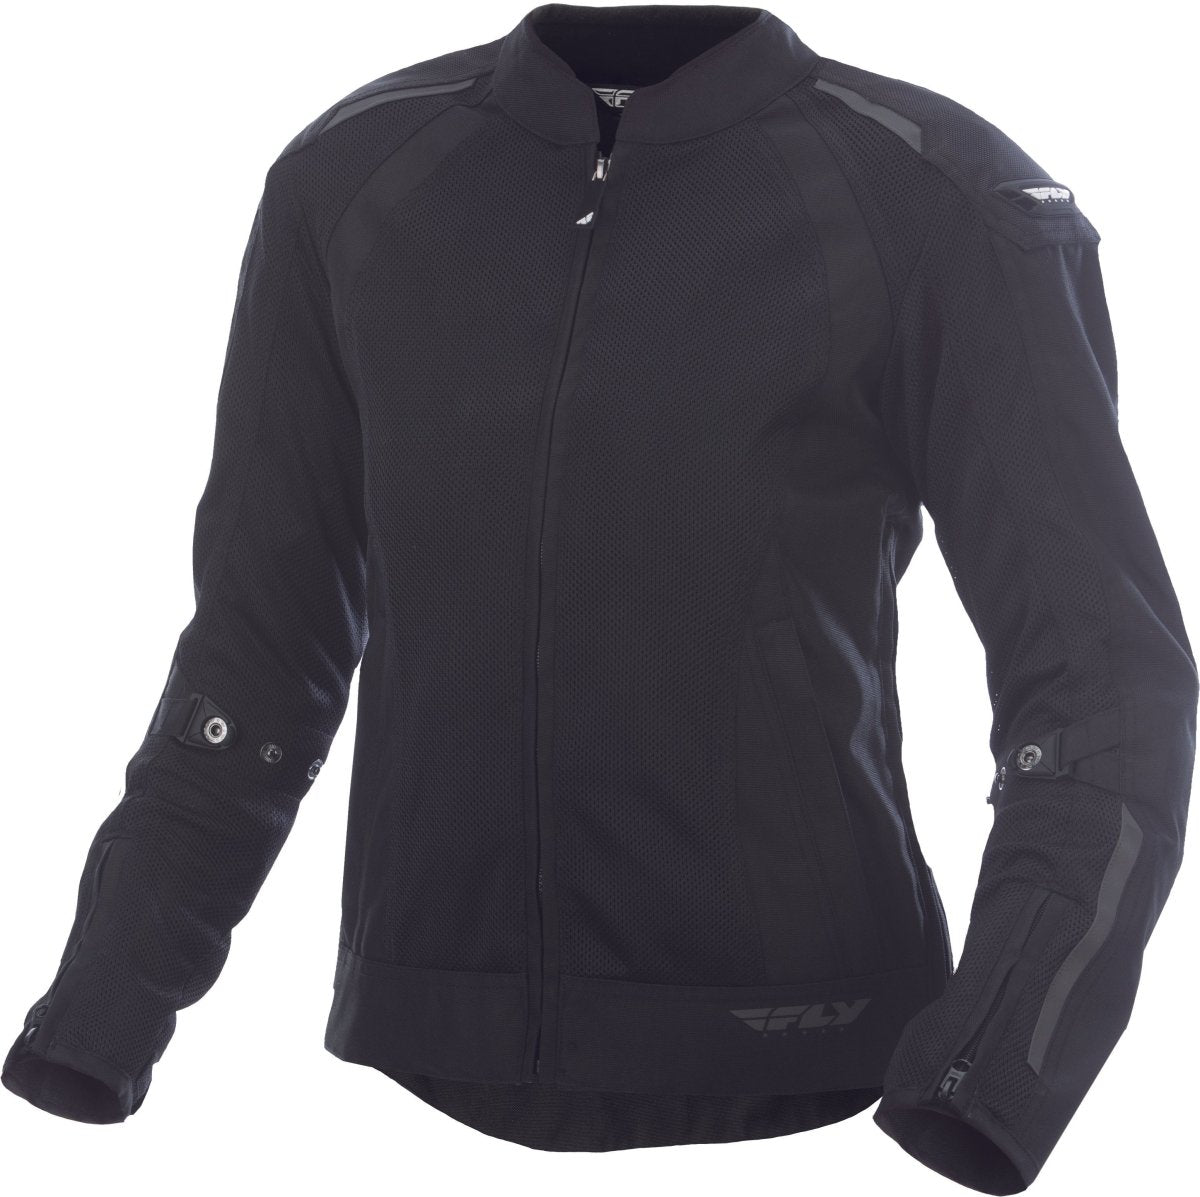 FLY RACING - WOMEN'S COOLPRO JACKET - 477-8050M - 191361096105